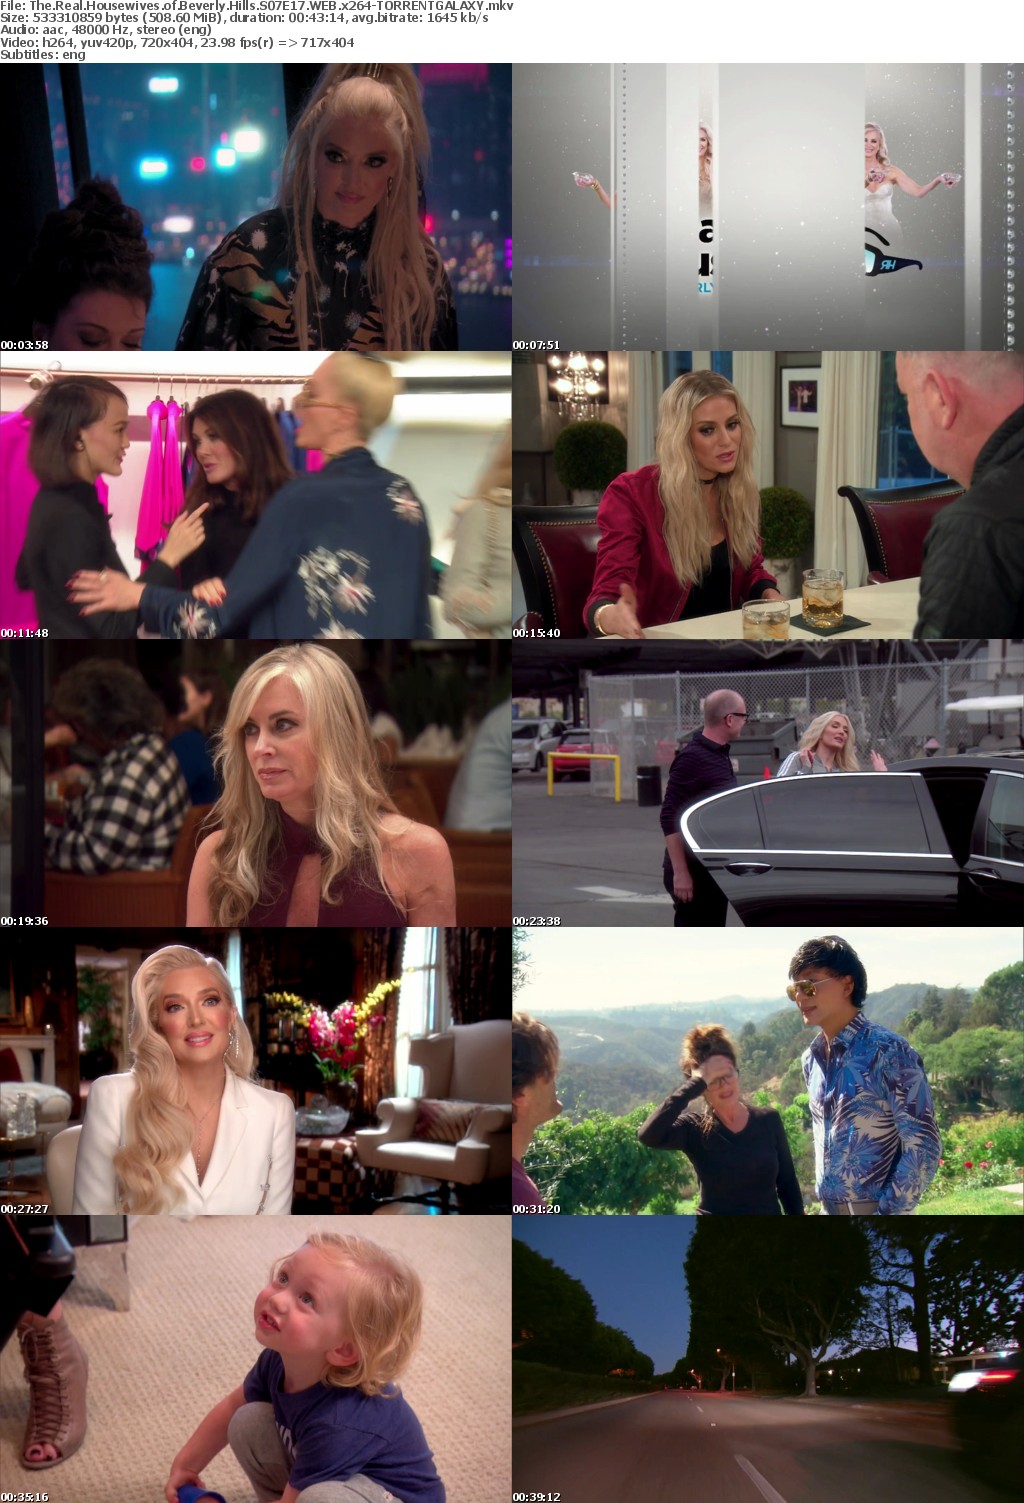 The Real Housewives of Beverly Hills S07E17 WEB x264-GALAXY